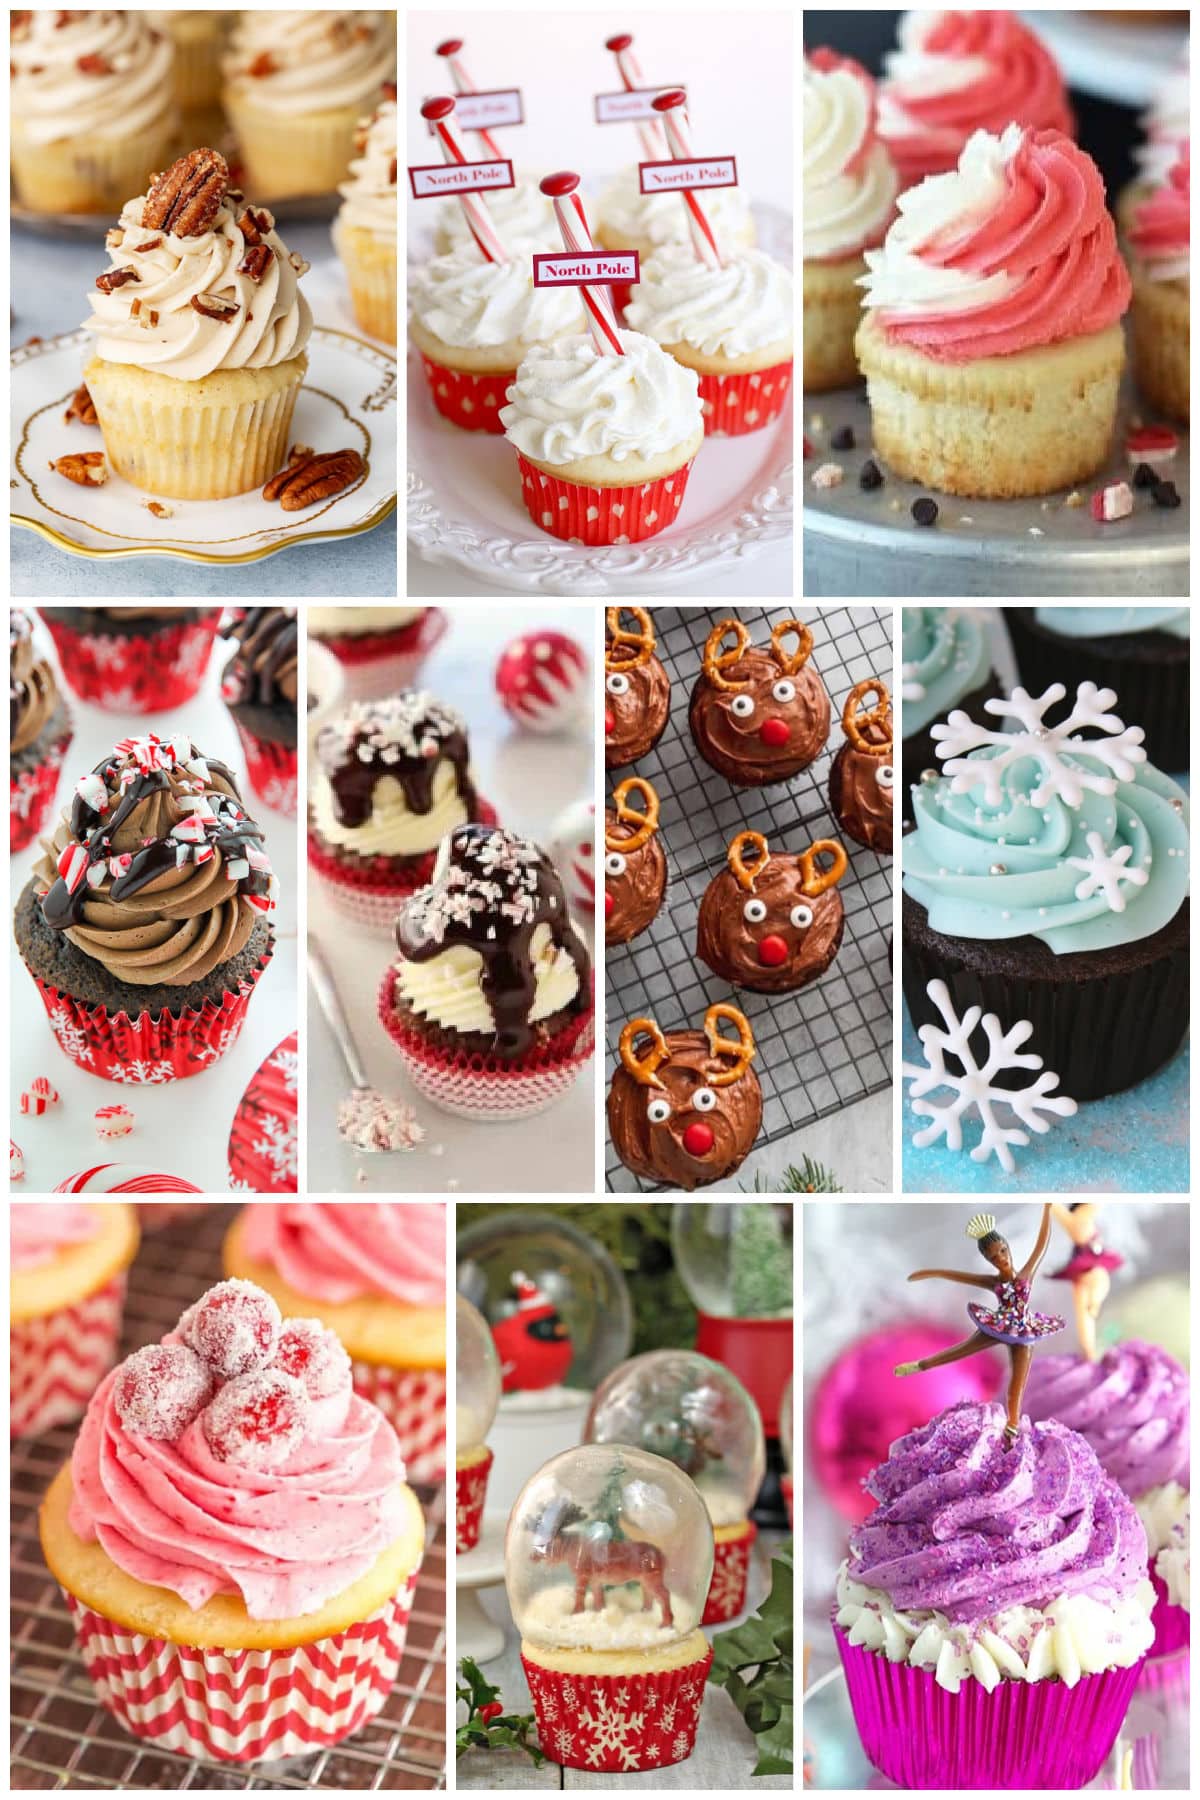 A group of images of festive holiday treats like snowflake cupcakes, North Pole cupcakes and reindeer cupcakes.